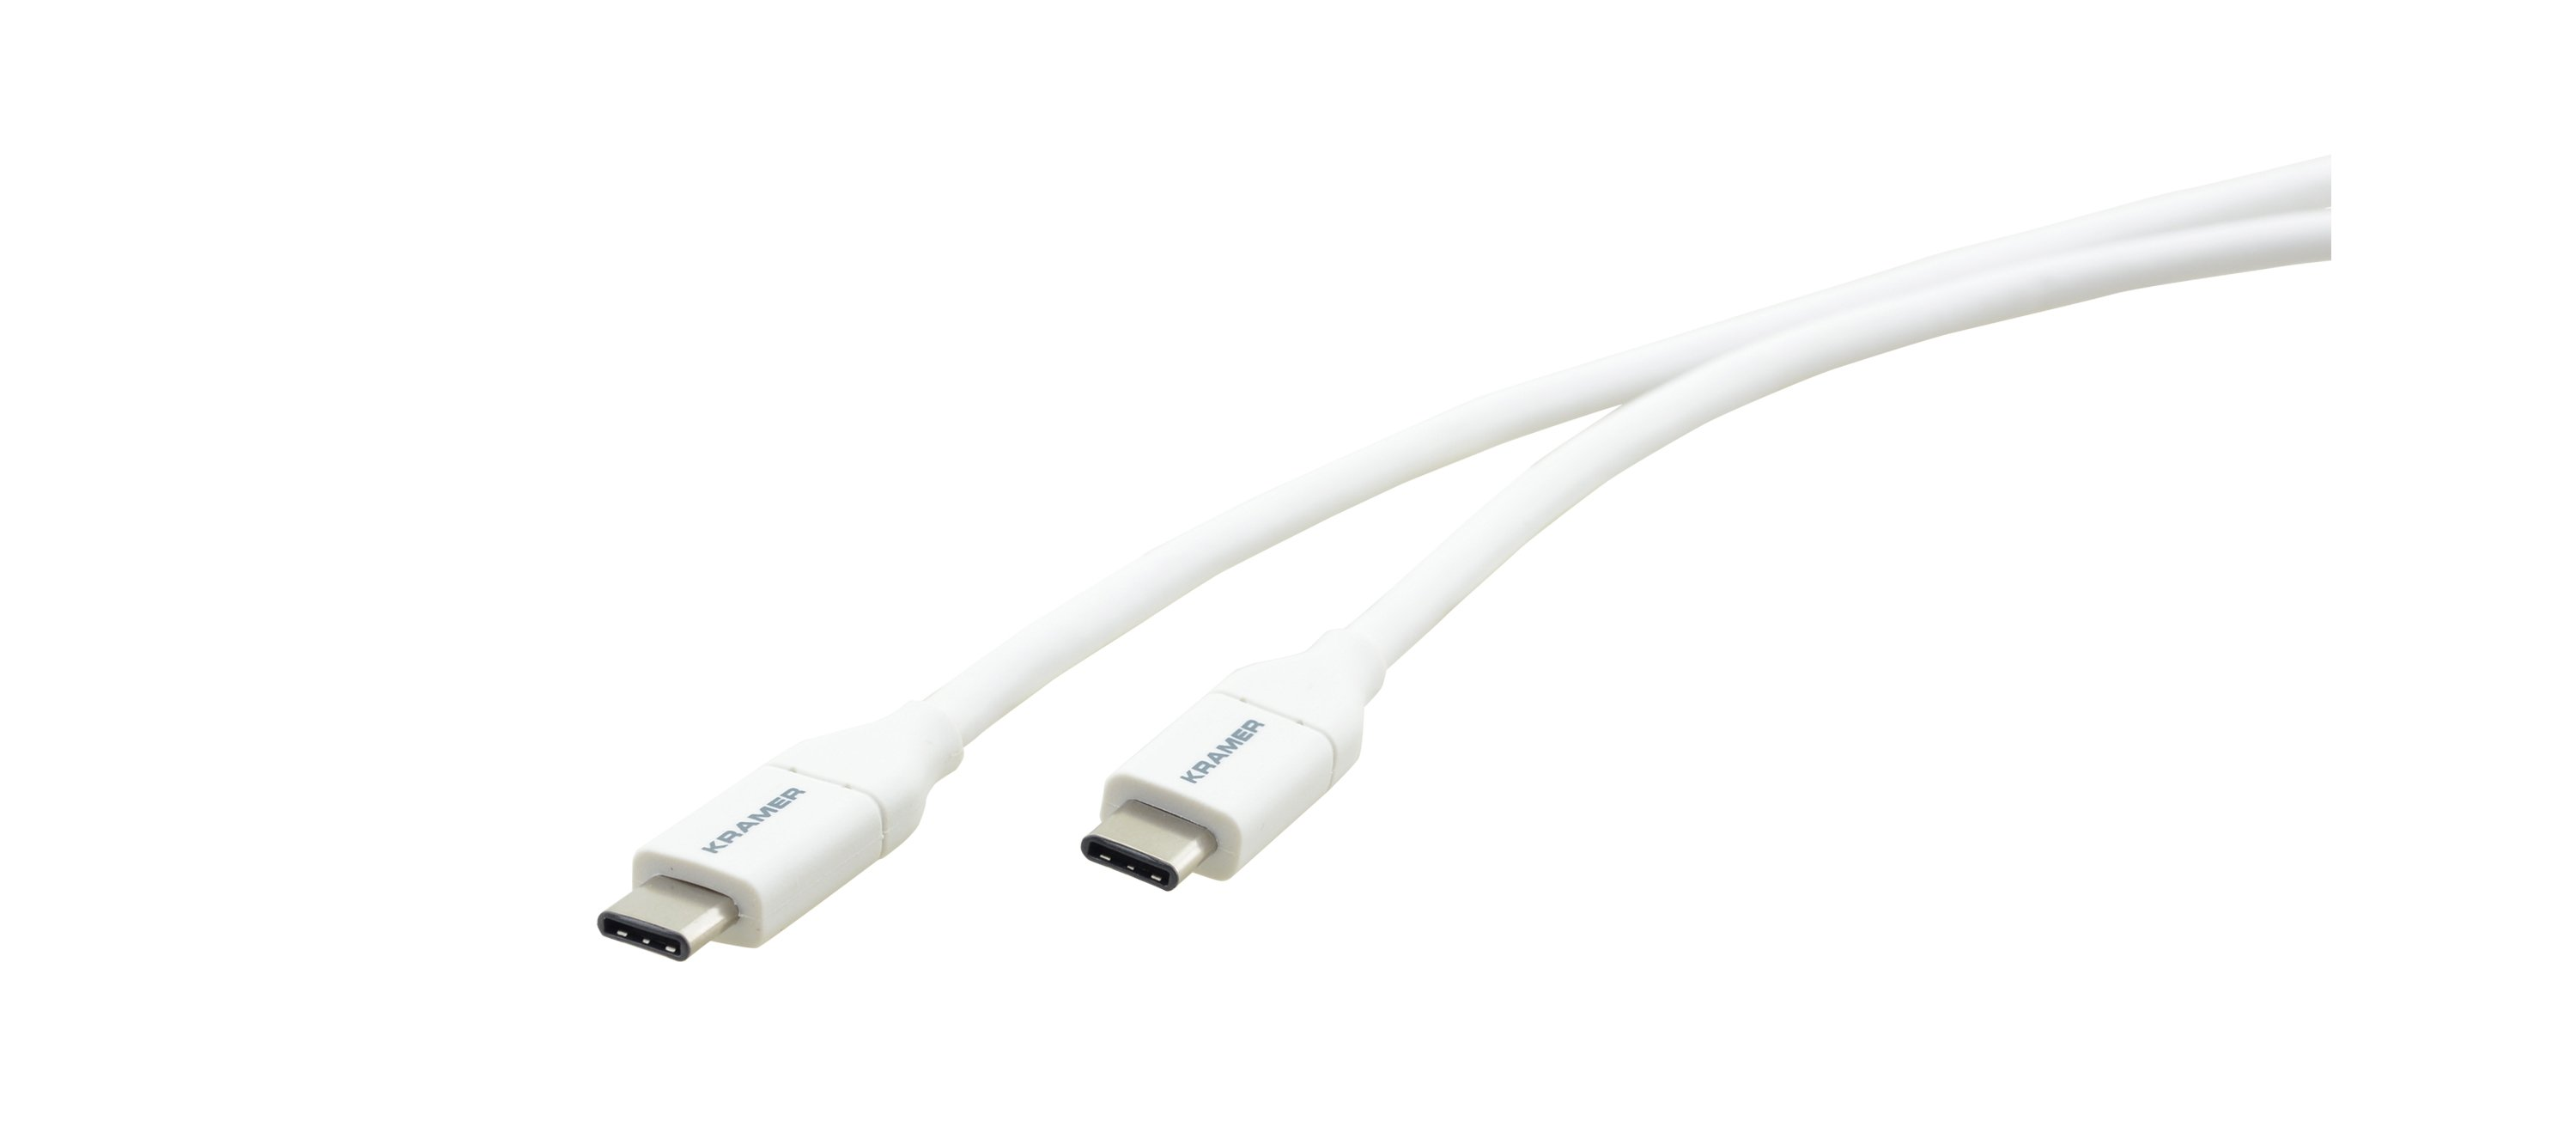 C-USB/CC-10 USB 2.0 C(M) to C(M) Cable-10ft